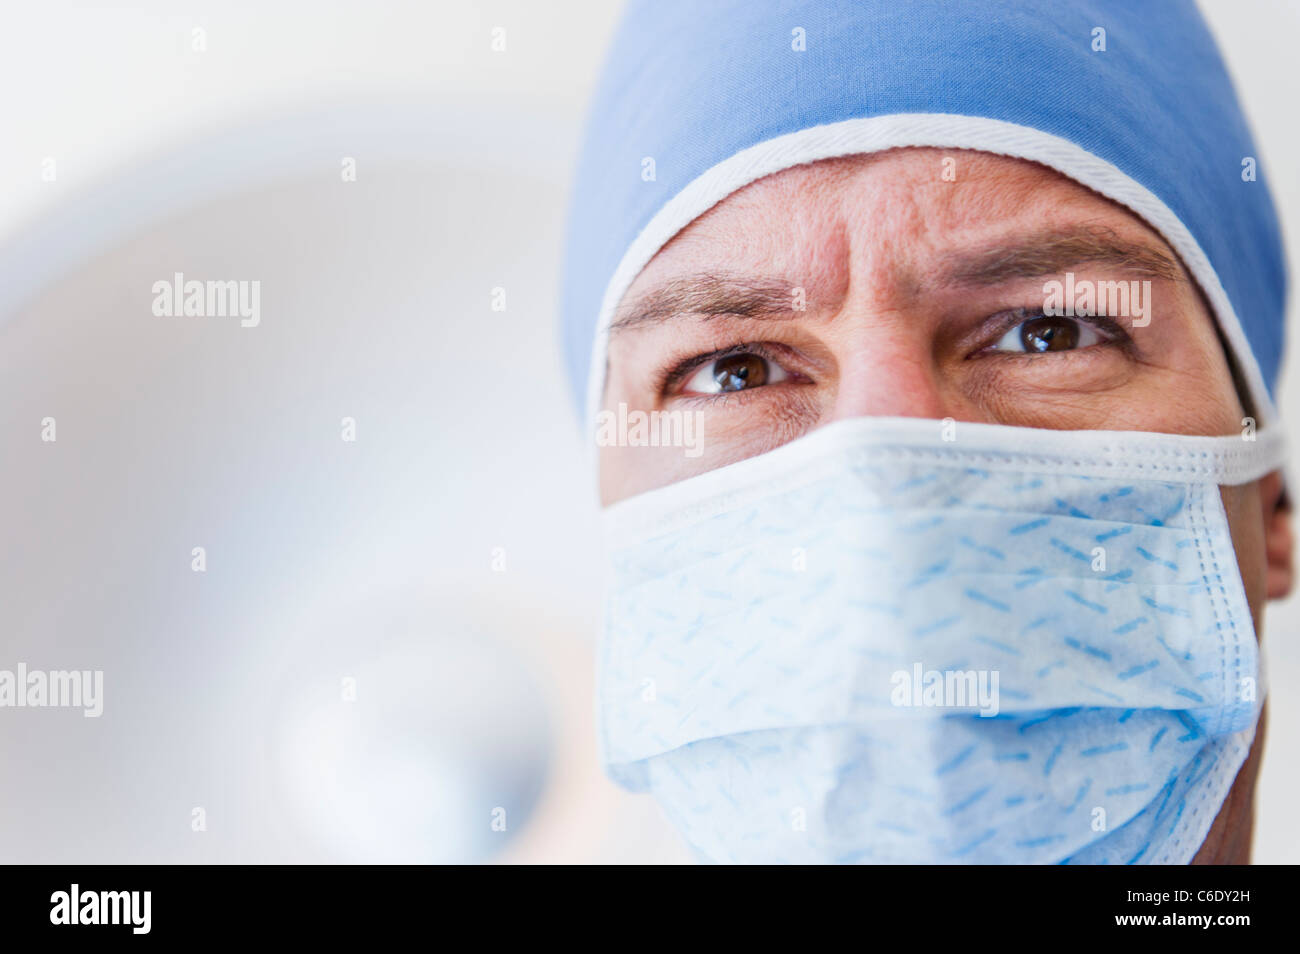 USA, New Jersey, Jersey City, homme chirurgien wearing surgical mask Banque D'Images